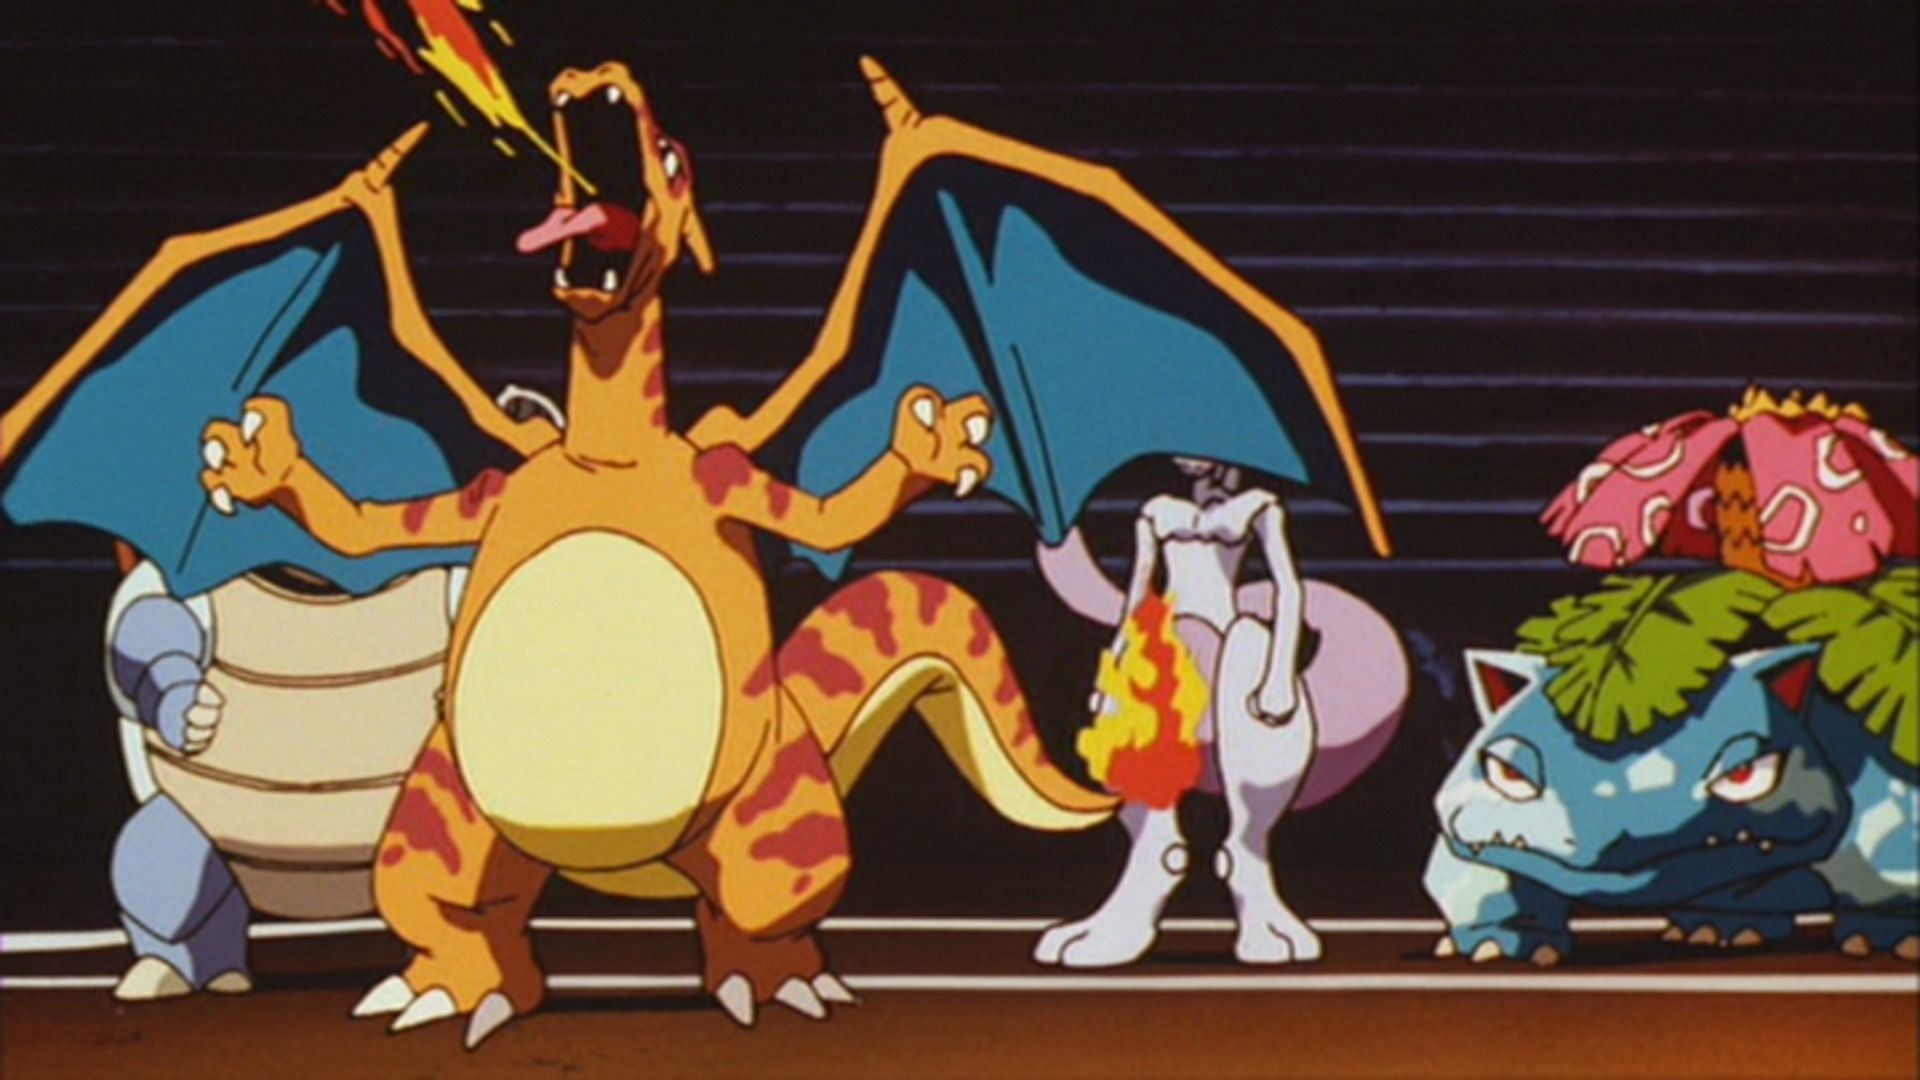 Charizardtwo as seen in the anime (Image via The Pokemon Company)